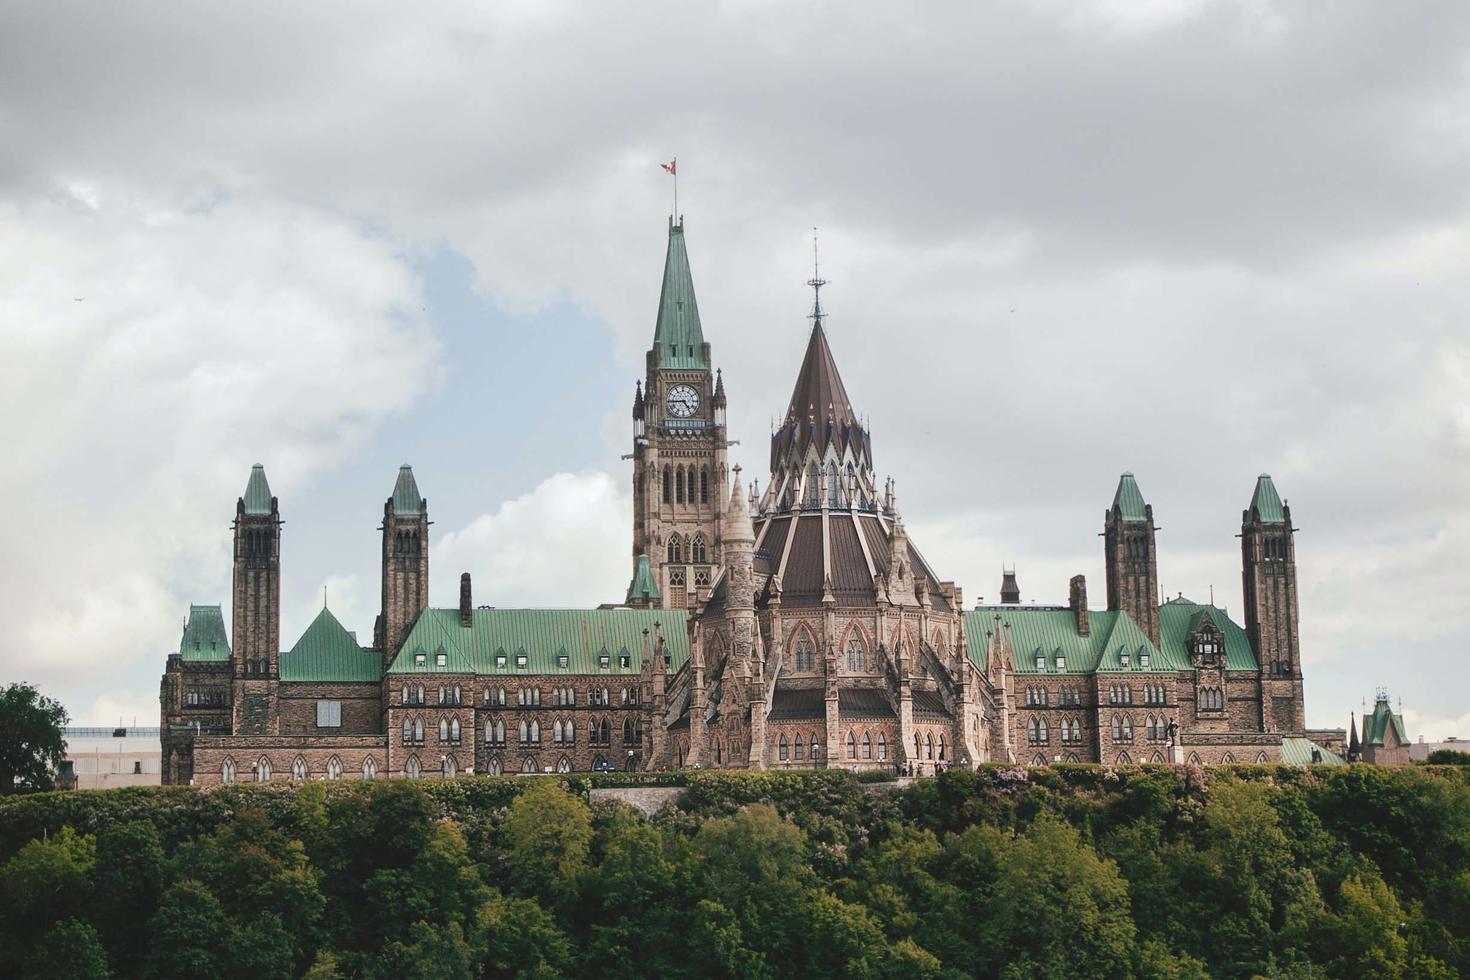 A view of the Parliament in Ottawa